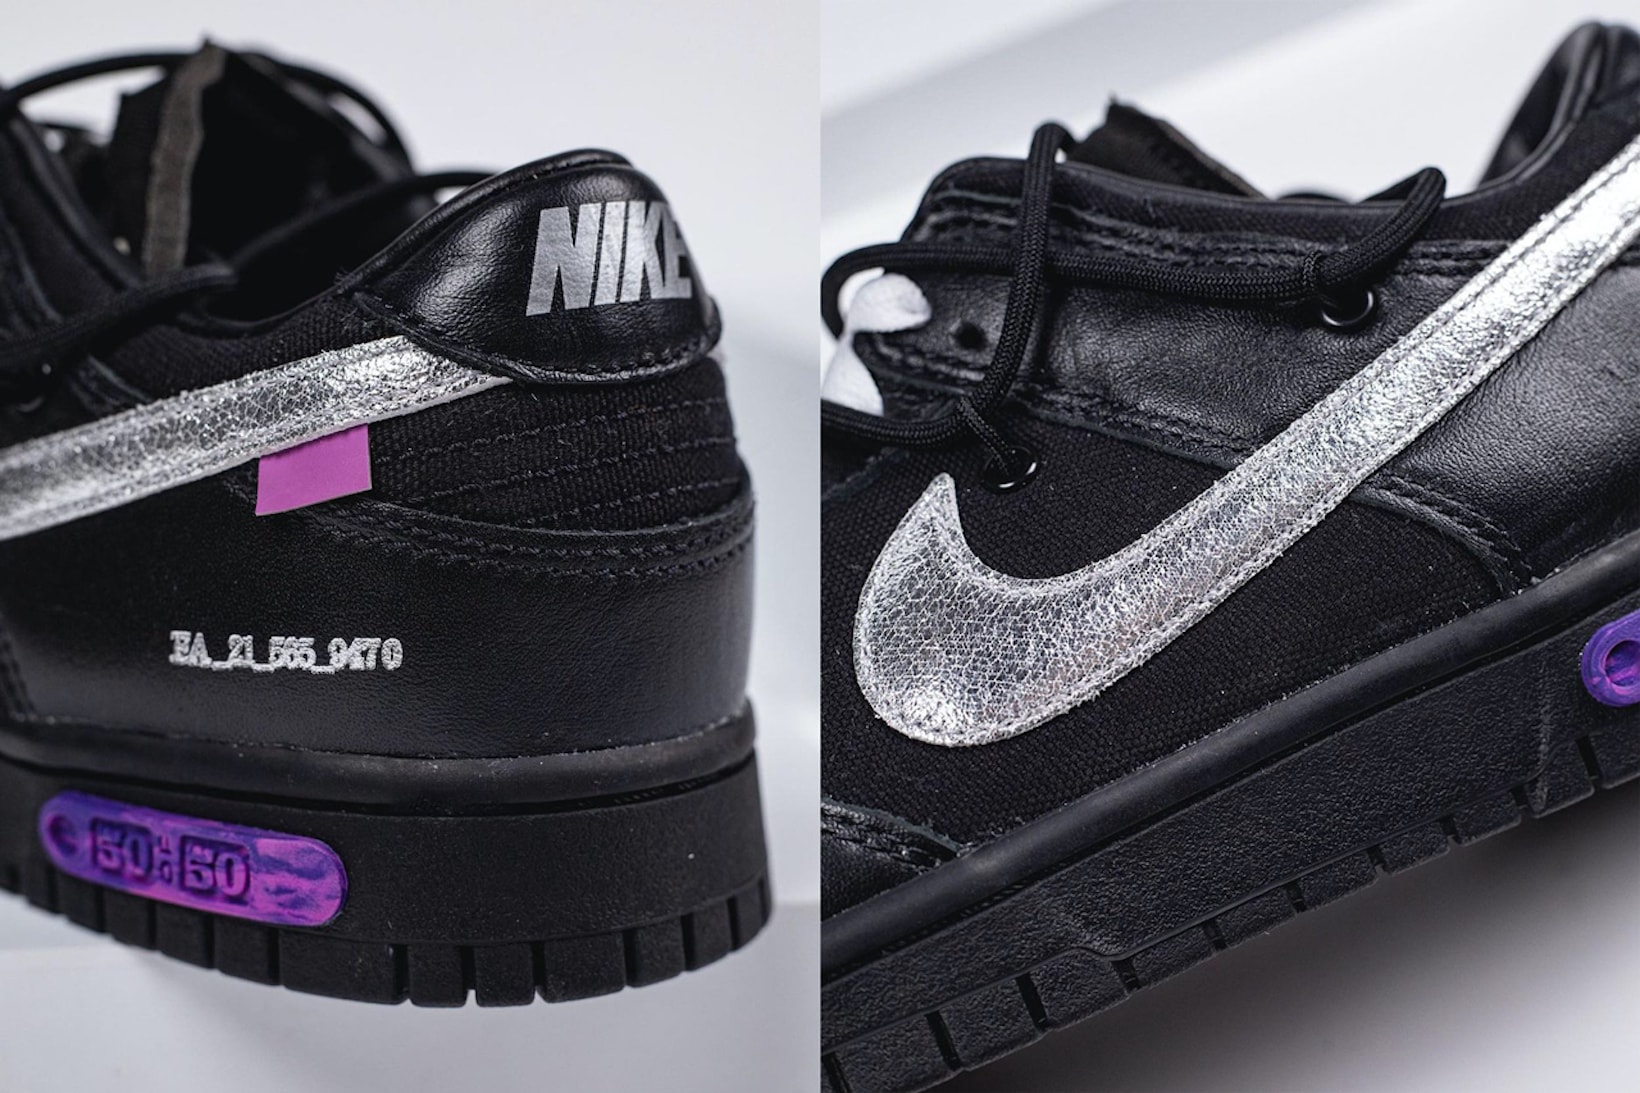 off white nike virgil abloh the 50 dunk low sneakers collaboration black silver colorway